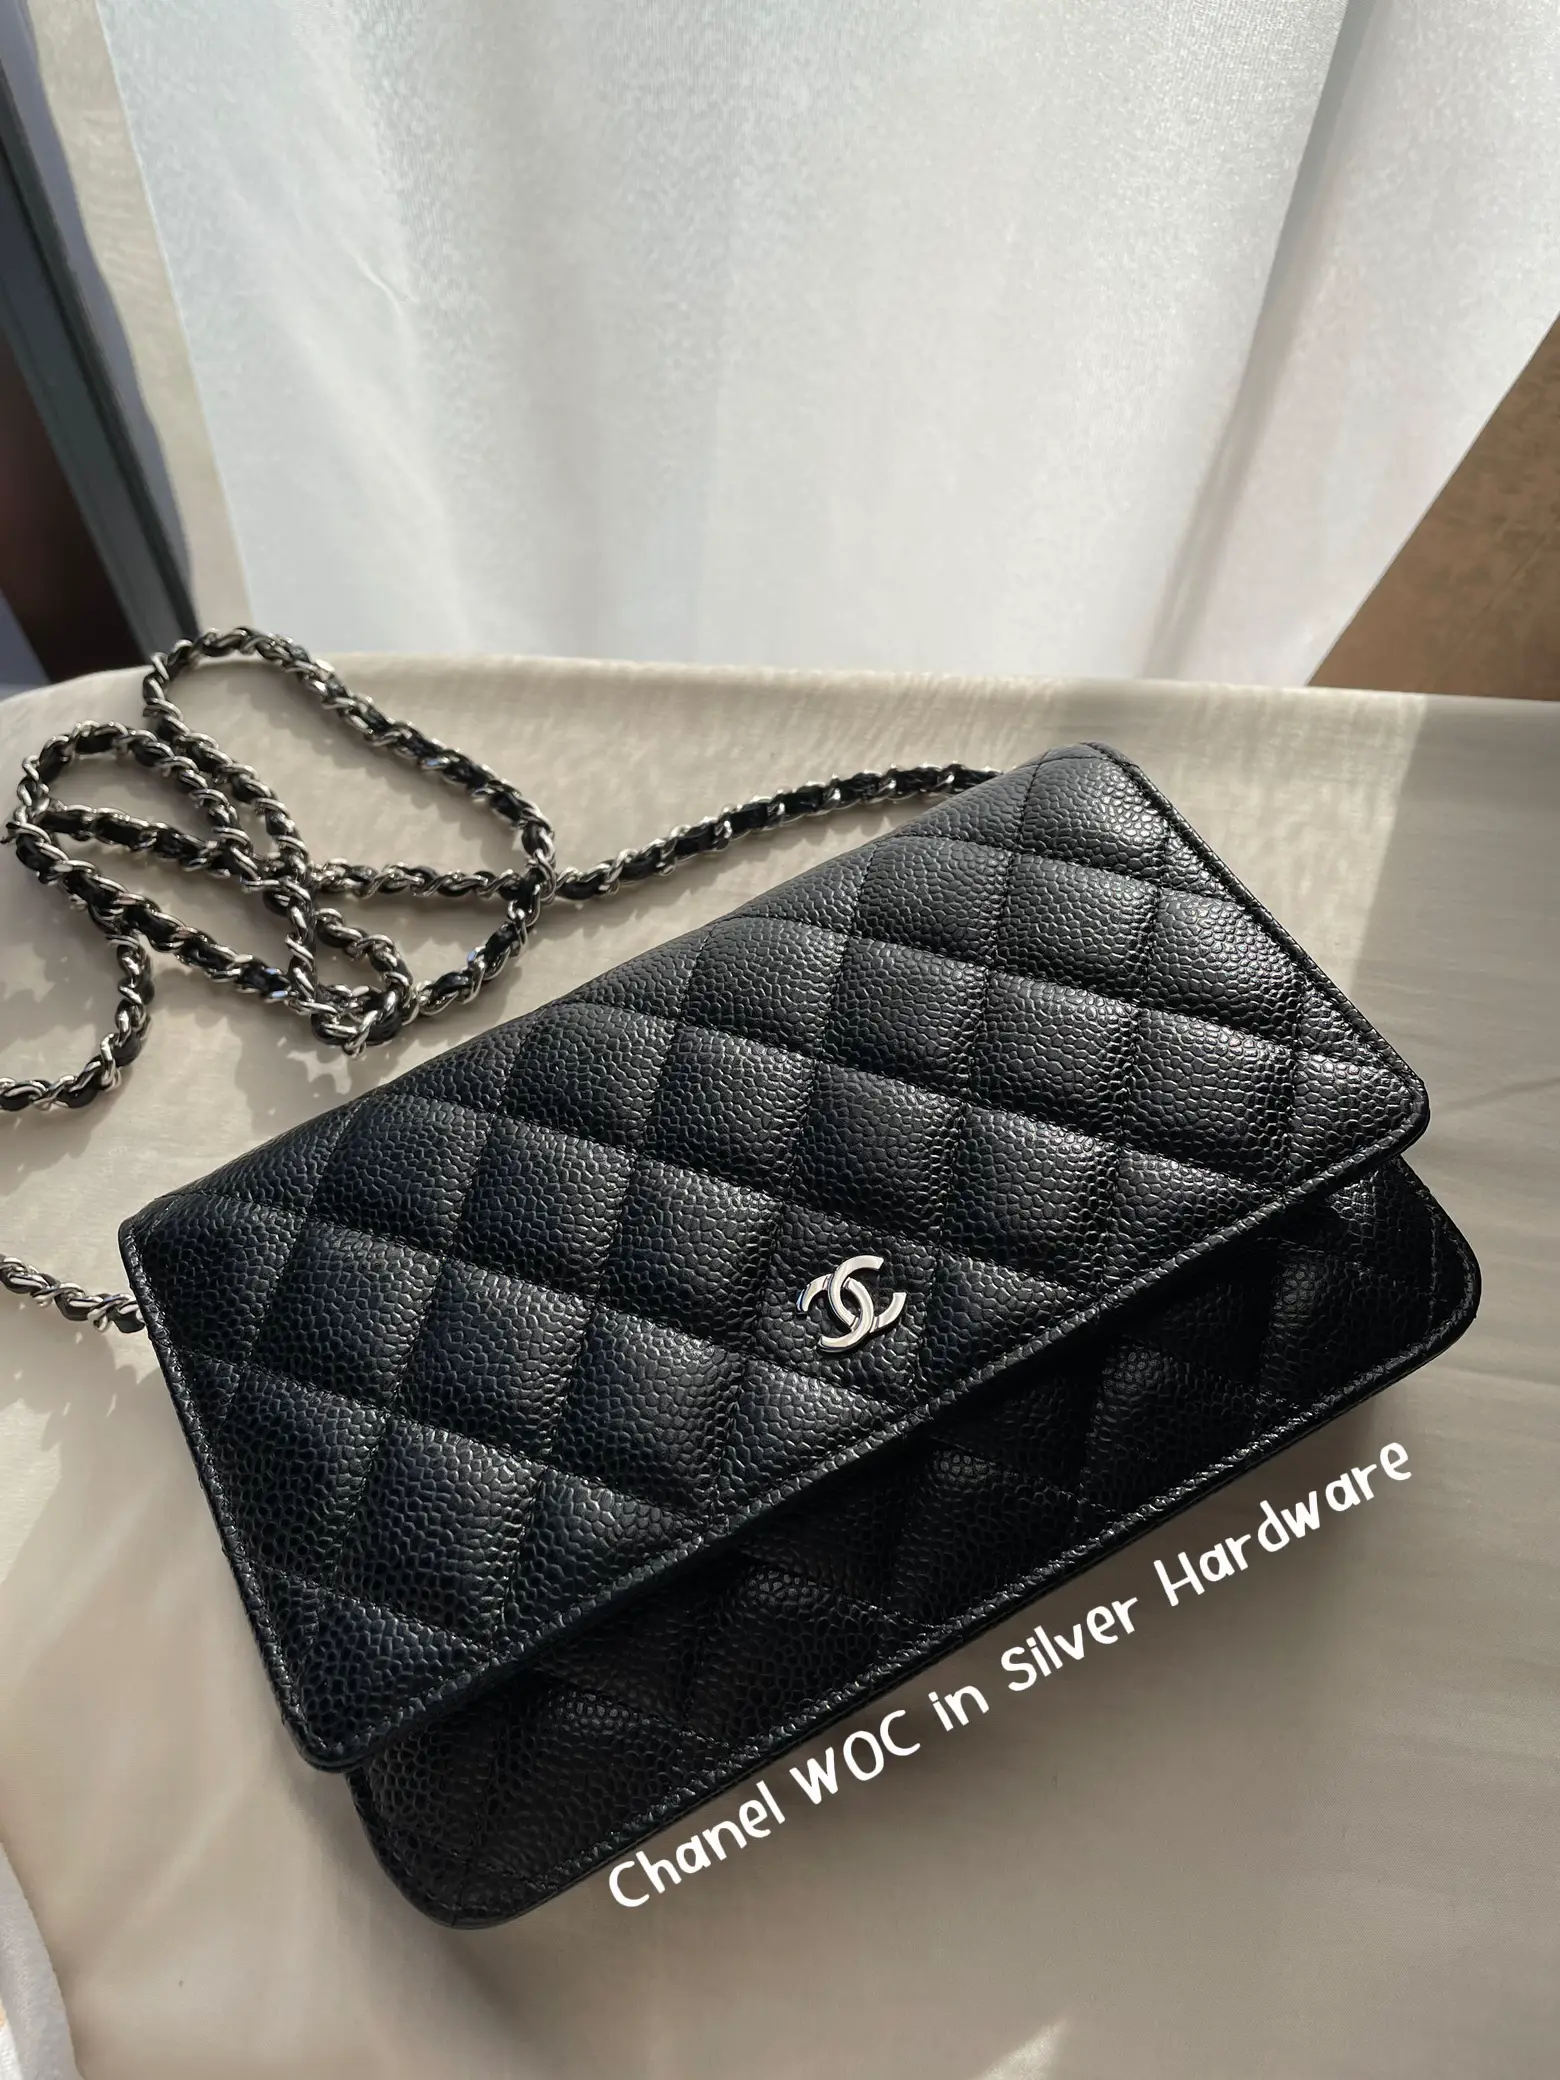 Chanel's Classic WOC is a mini Classic Flap bag 👀, Gallery posted by Rie  ☁️